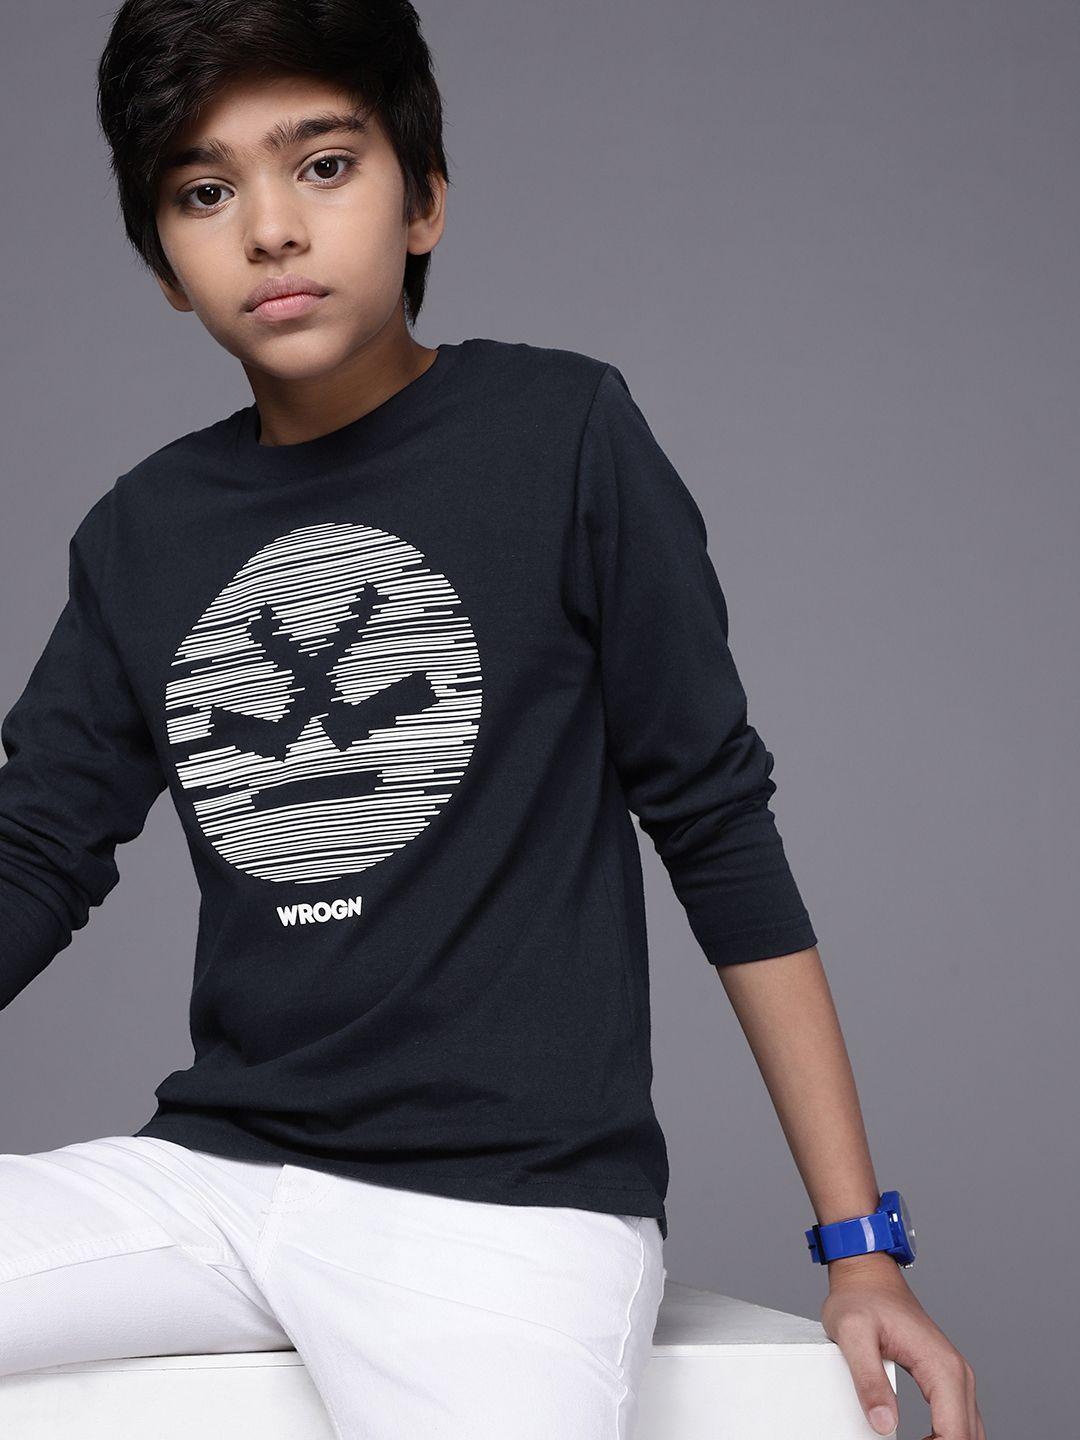 wrogn youth boys navy blue & white brand logo printed pure cotton t-shirt